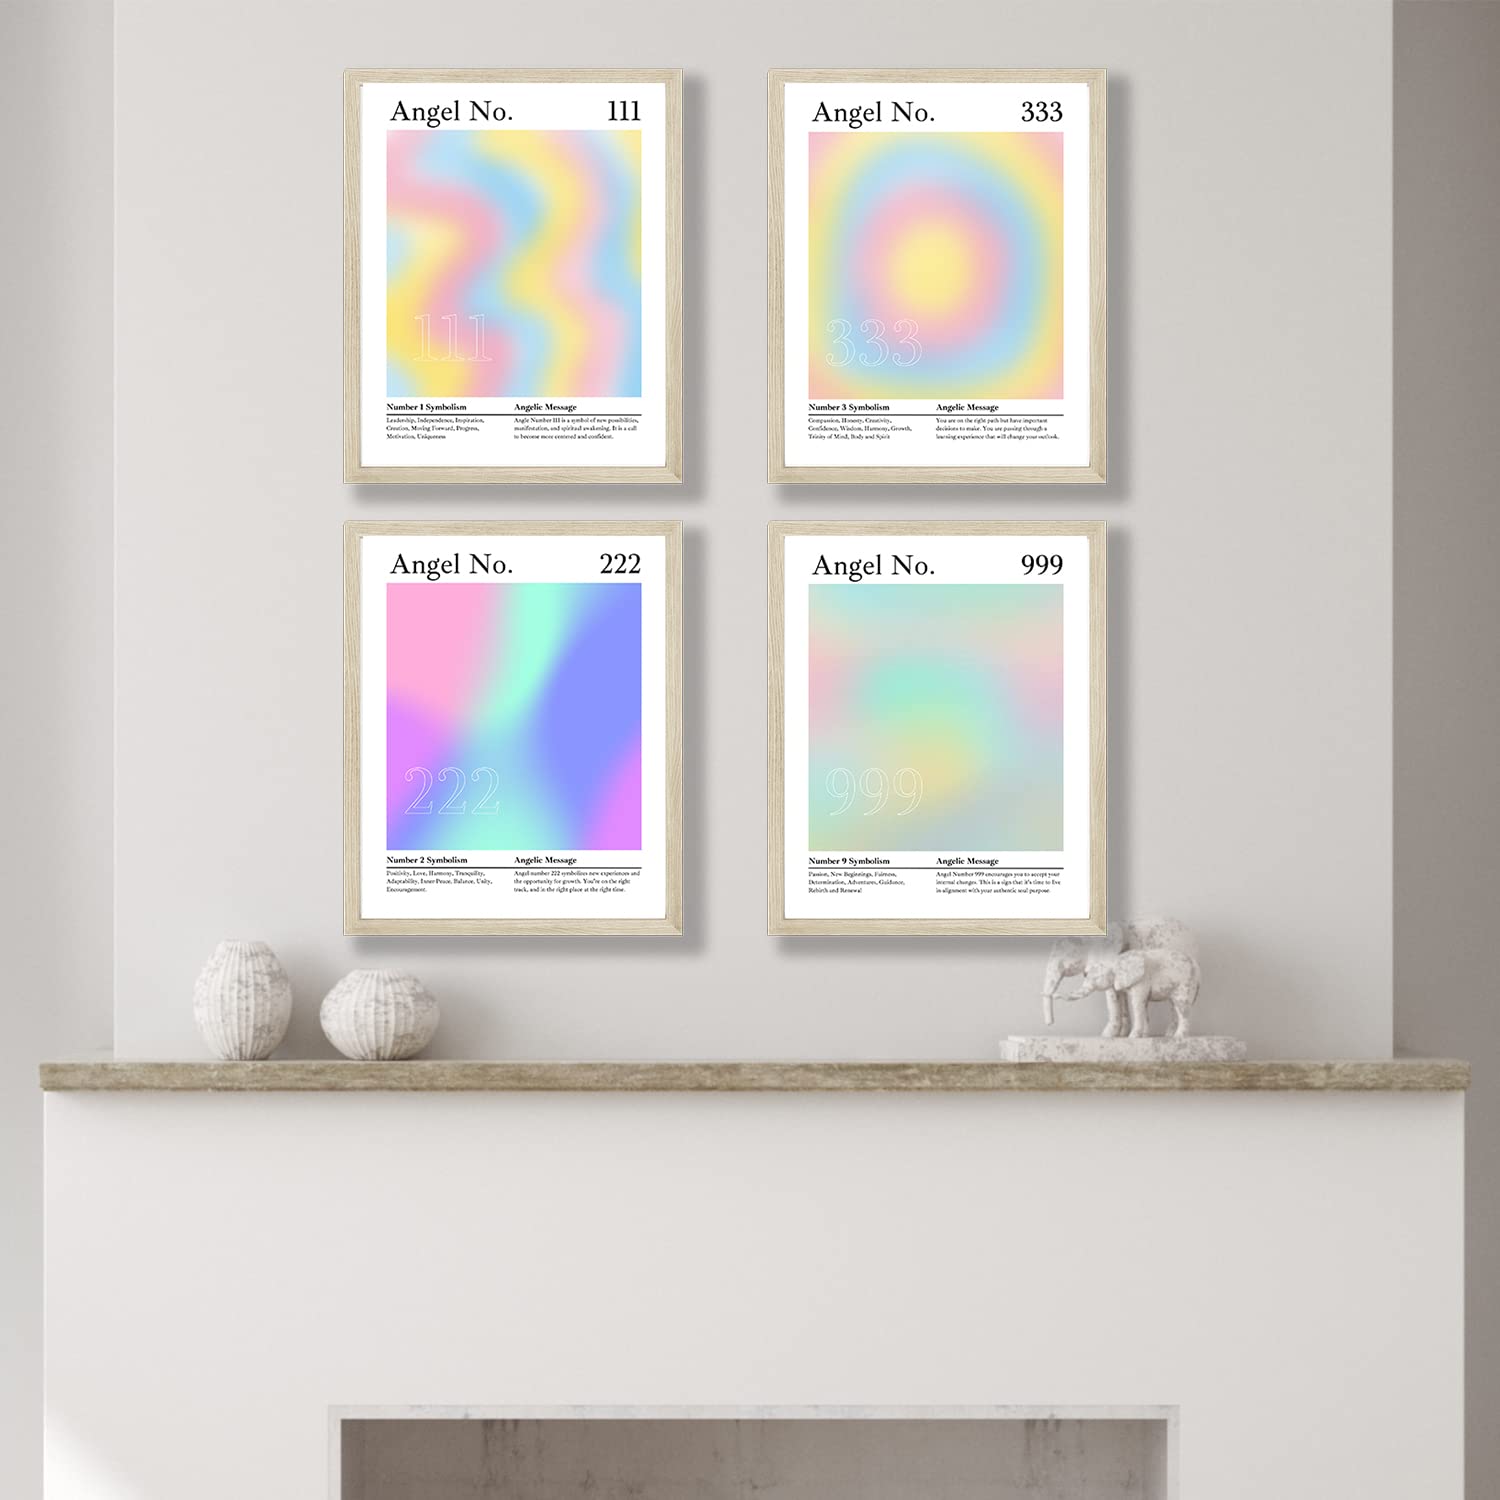 Roxbury Row Aura Poster Aesthetic, Angel Number Poster, Angel Wall Decor, Gradient Painting, Spiritual Posters, Posters & Prints (4 8x10 Unframed Prints, 1239: Intuition, Alignment, Support, Release)